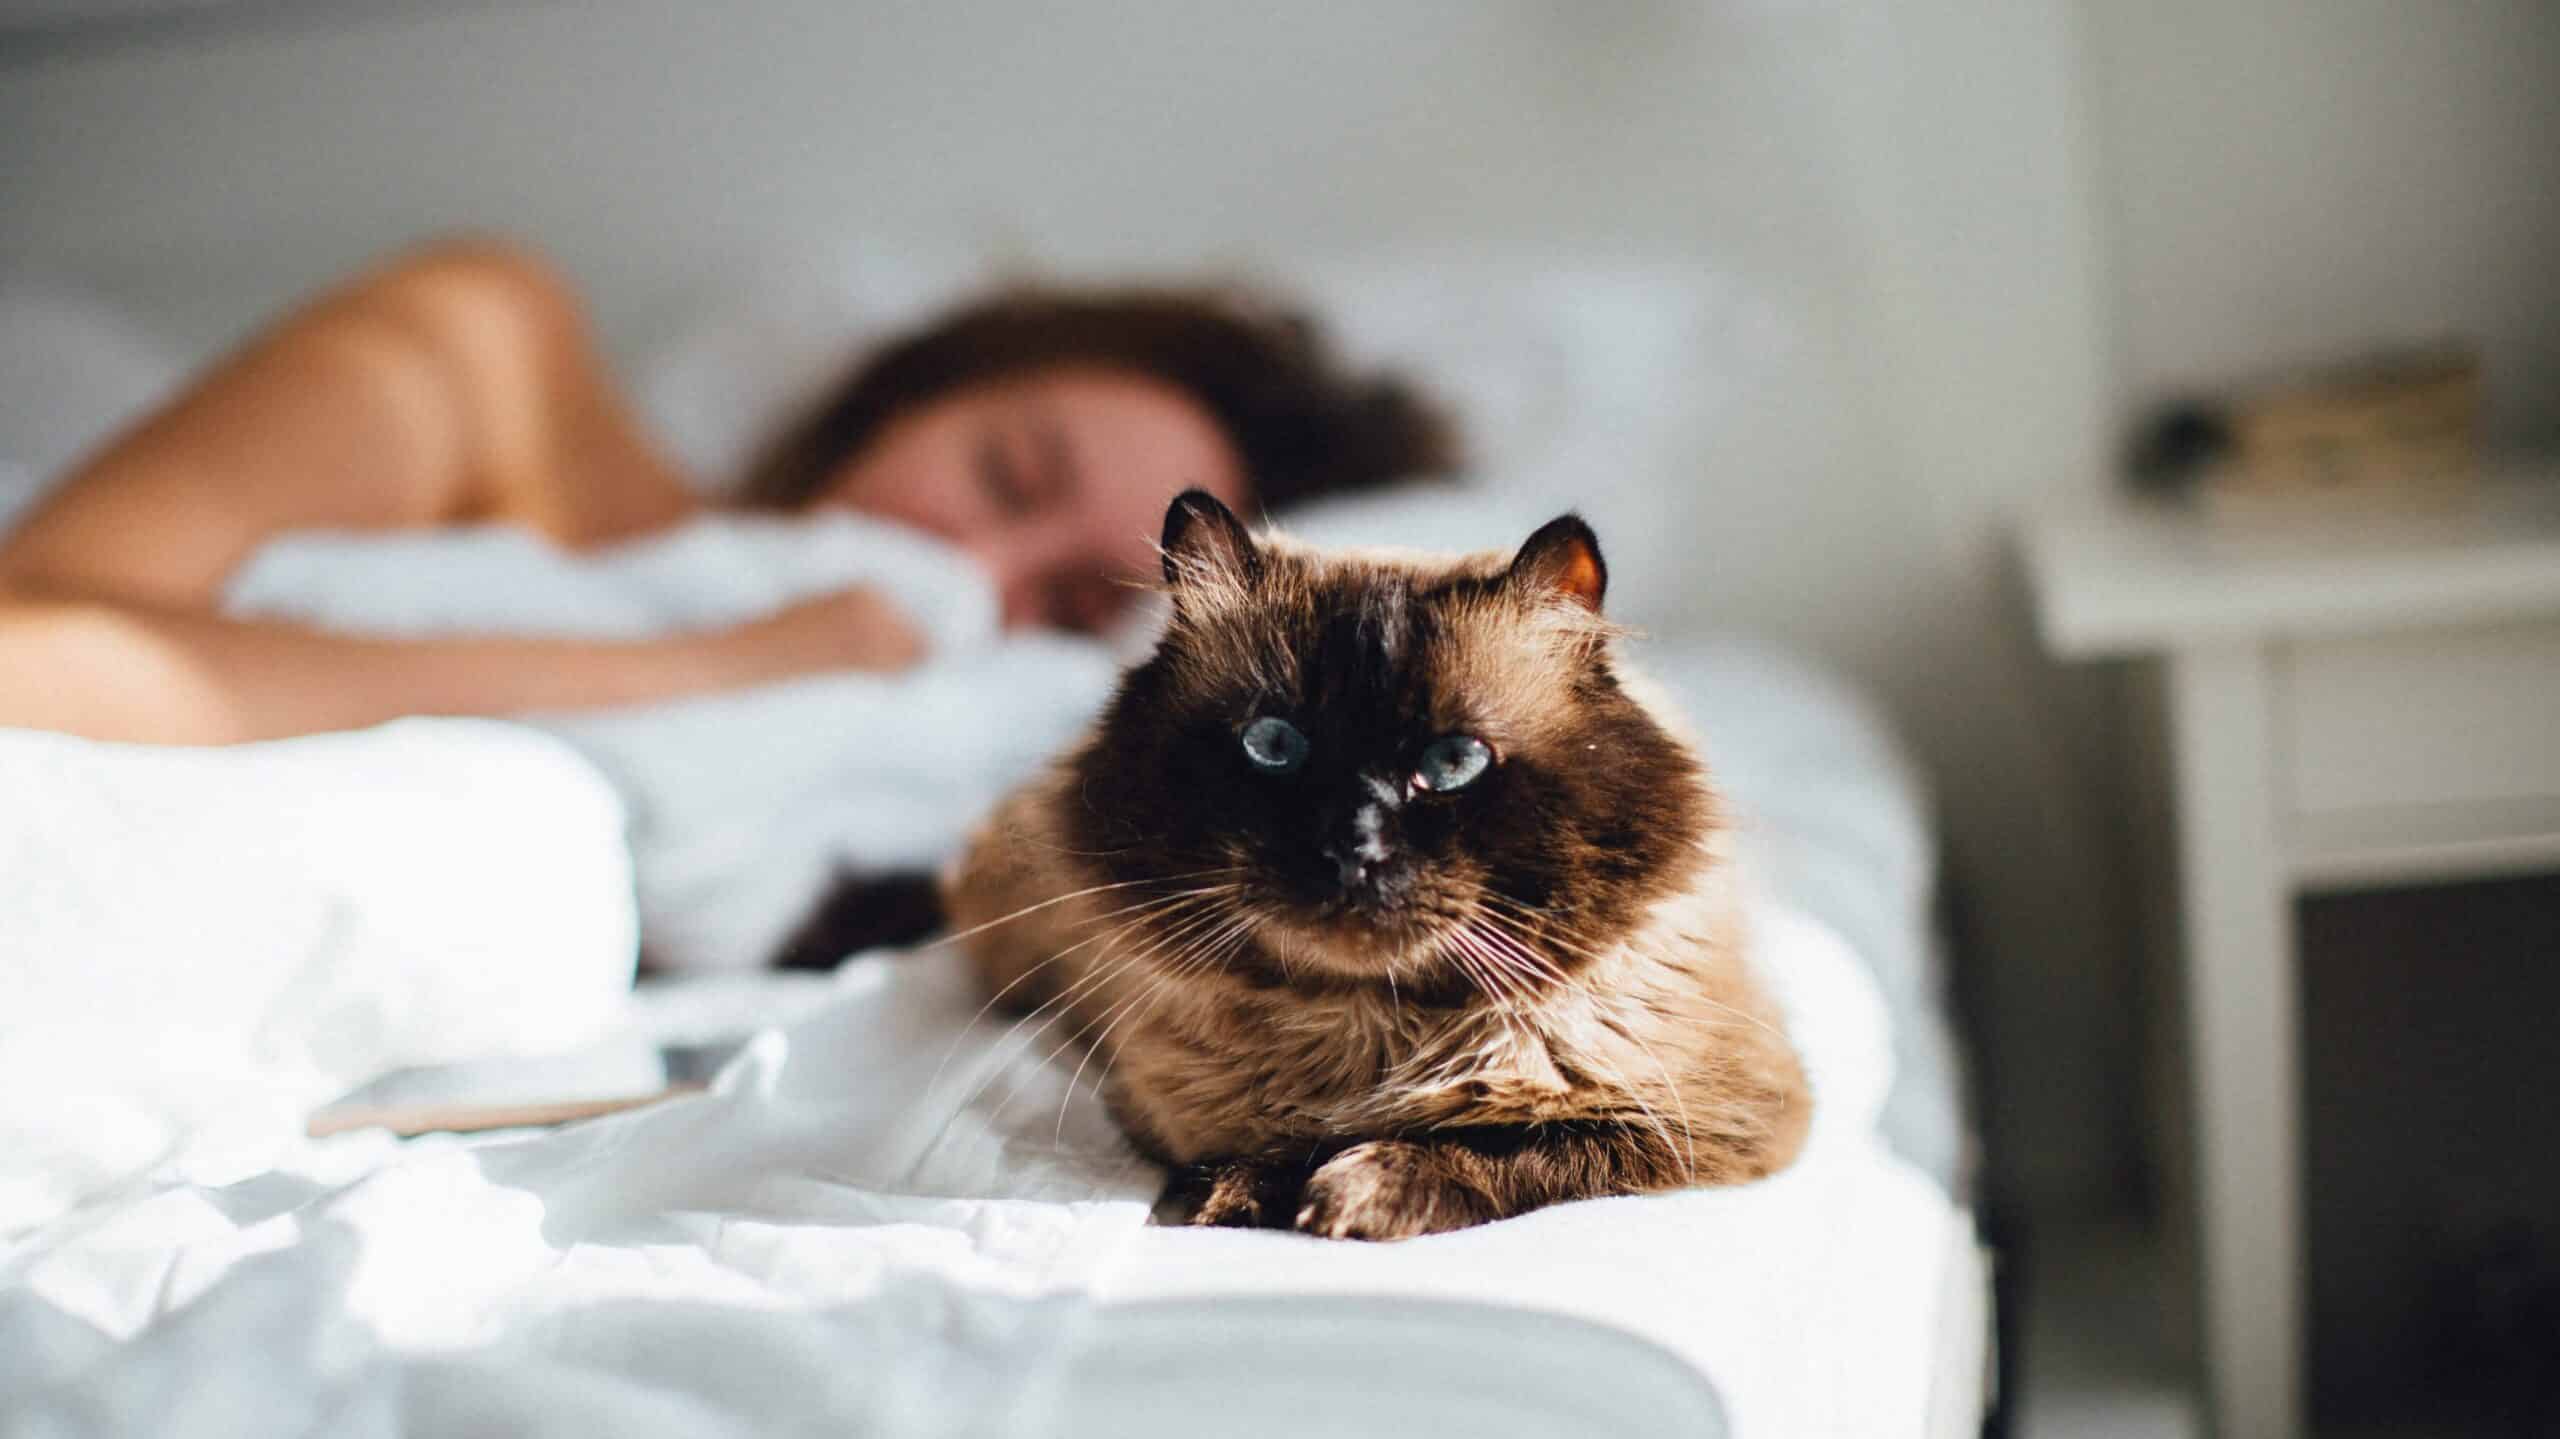 woman laying in bed with a cat - benefits of sleeping with crystals under your pillow